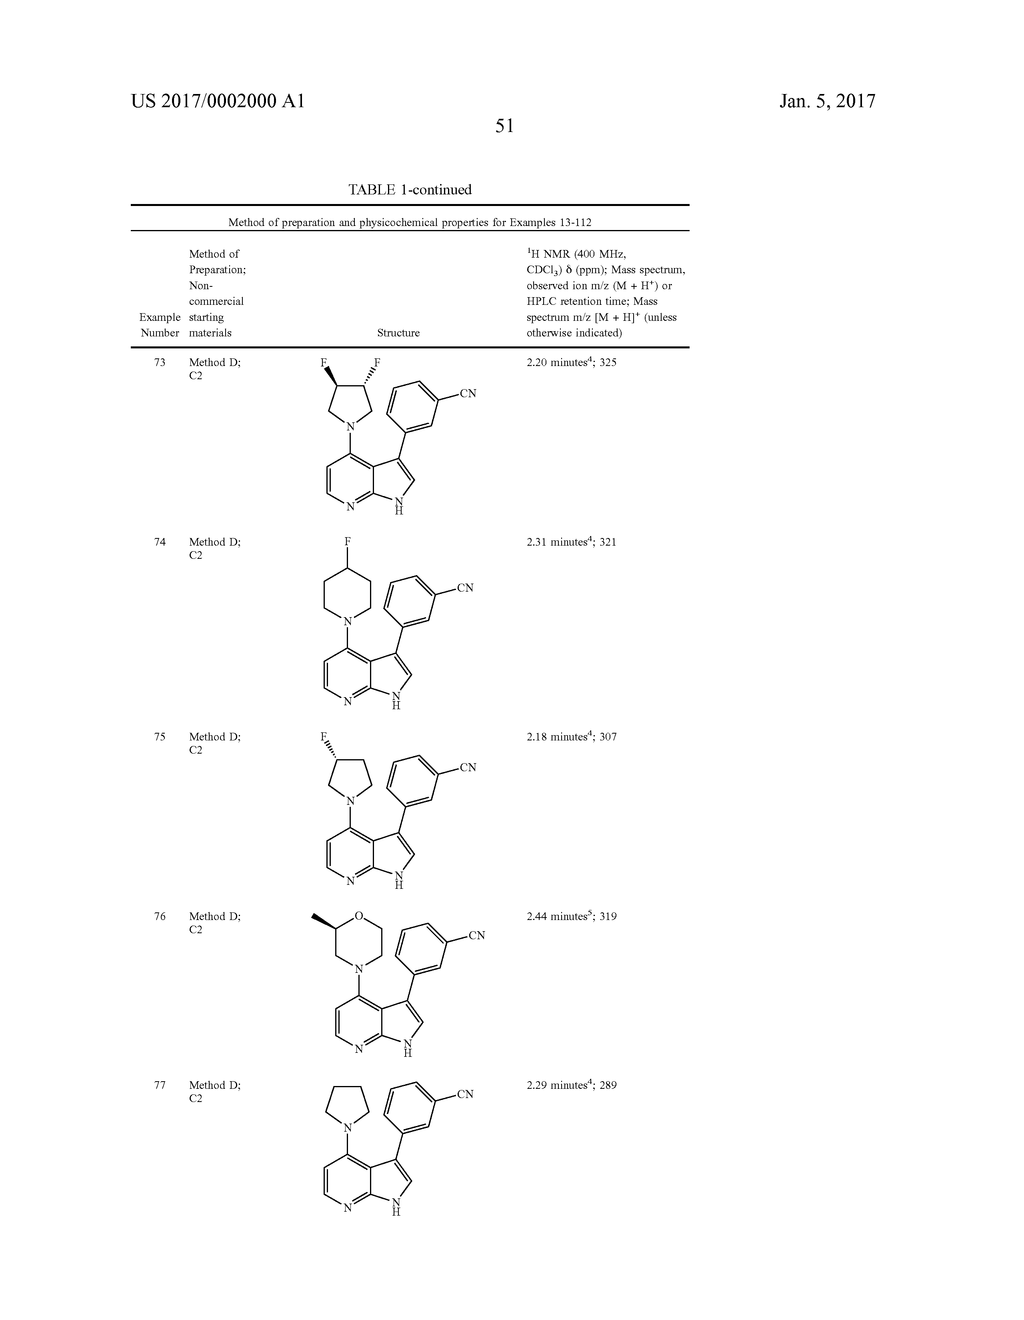 NOVEL 3,4-DISUBSTITUTED-1H-PYRROLO[2,3-b]PYRIDINES AND     4,5-DISUBSTITUTED-7H-PYRROLO[2,3-c]PYRIDAZINES AS LRRK2 INHIBITORS - diagram, schematic, and image 52